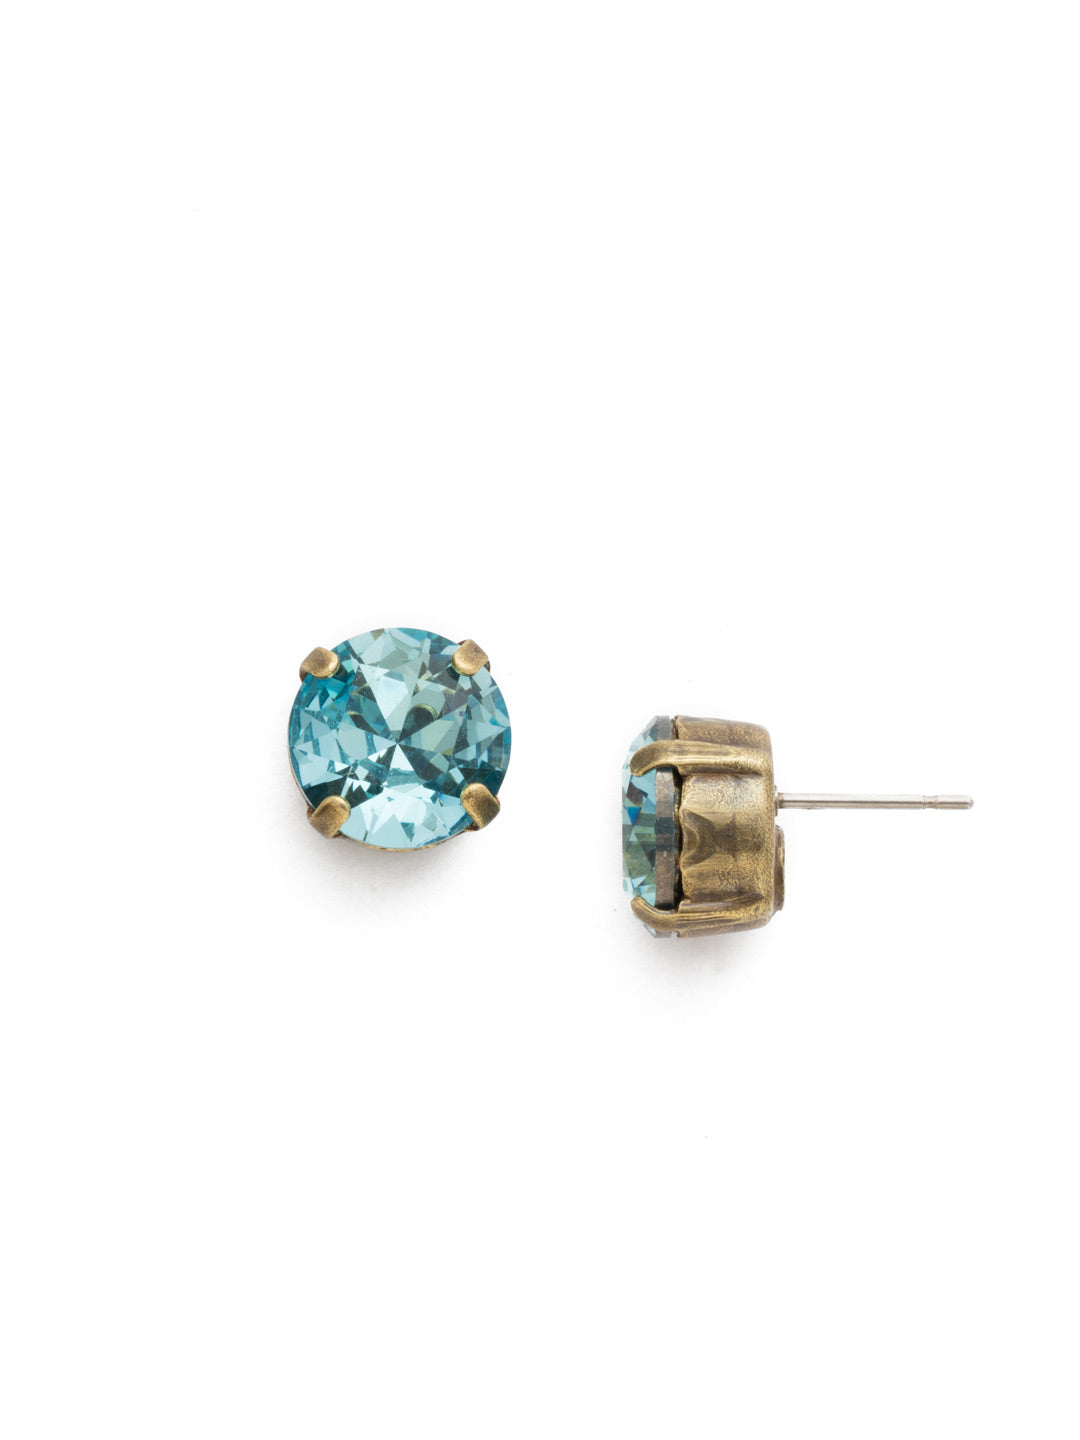 London Stud Earrings - ECM14AGAQU - <p>Everyone needs a great pair of studs. Add some classic sparkle to any occasion with these stud earrings. Need help picking a stud? <a href="https://www.sorrelli.com/blogs/sisterhood/round-stud-earrings-101-a-rundown-of-sizes-styles-and-sparkle">Check out our size guide!</a> From Sorrelli's Aquamarine collection in our Antique Gold-tone finish.</p>